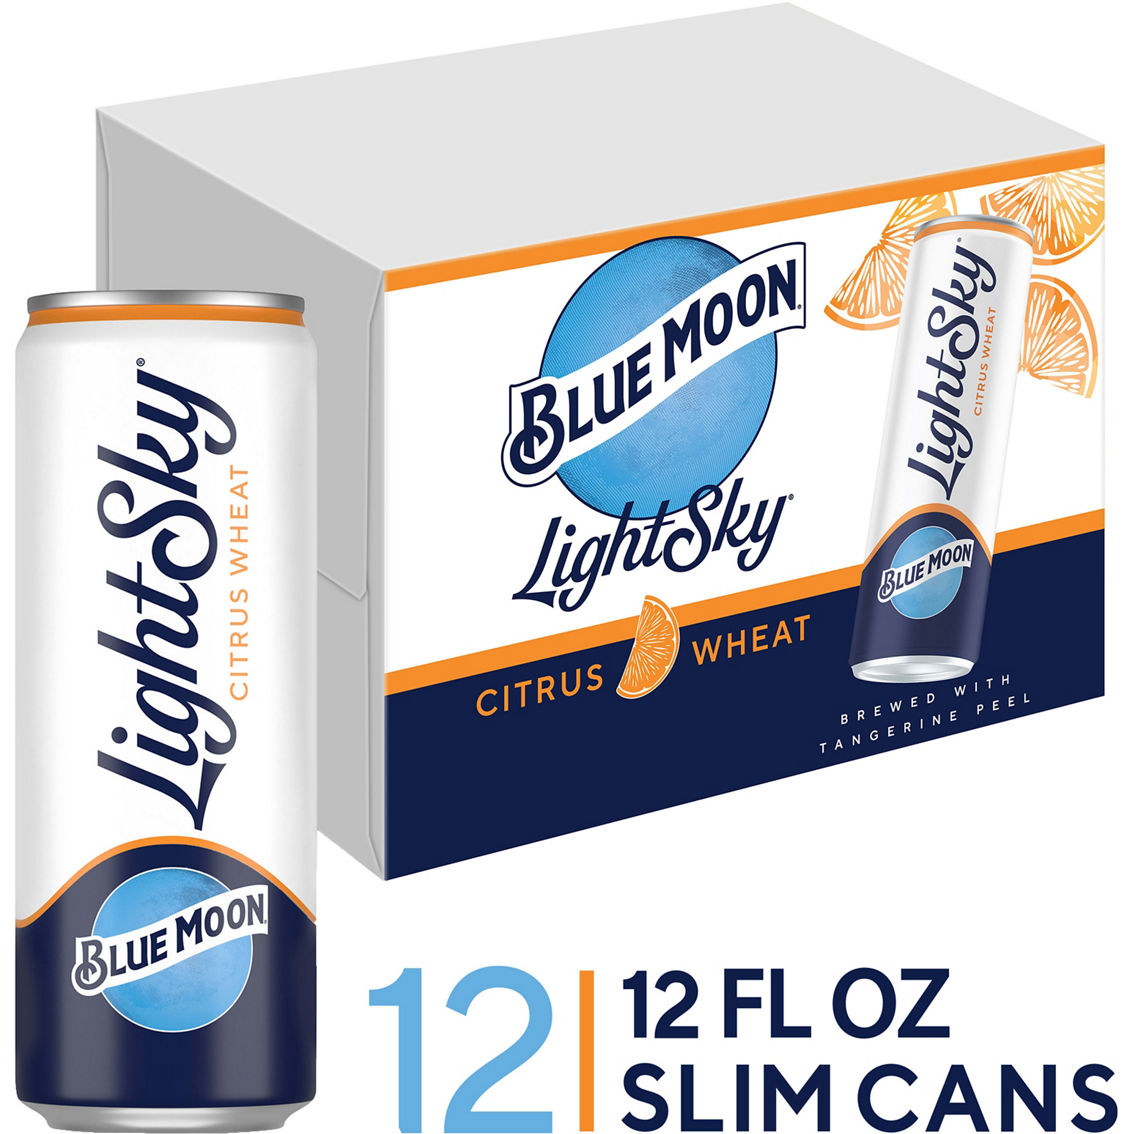 Blue Moon Light Sky Citrus Wheat Beer 12 pk., 12 oz. Cans - Image 2 of 2